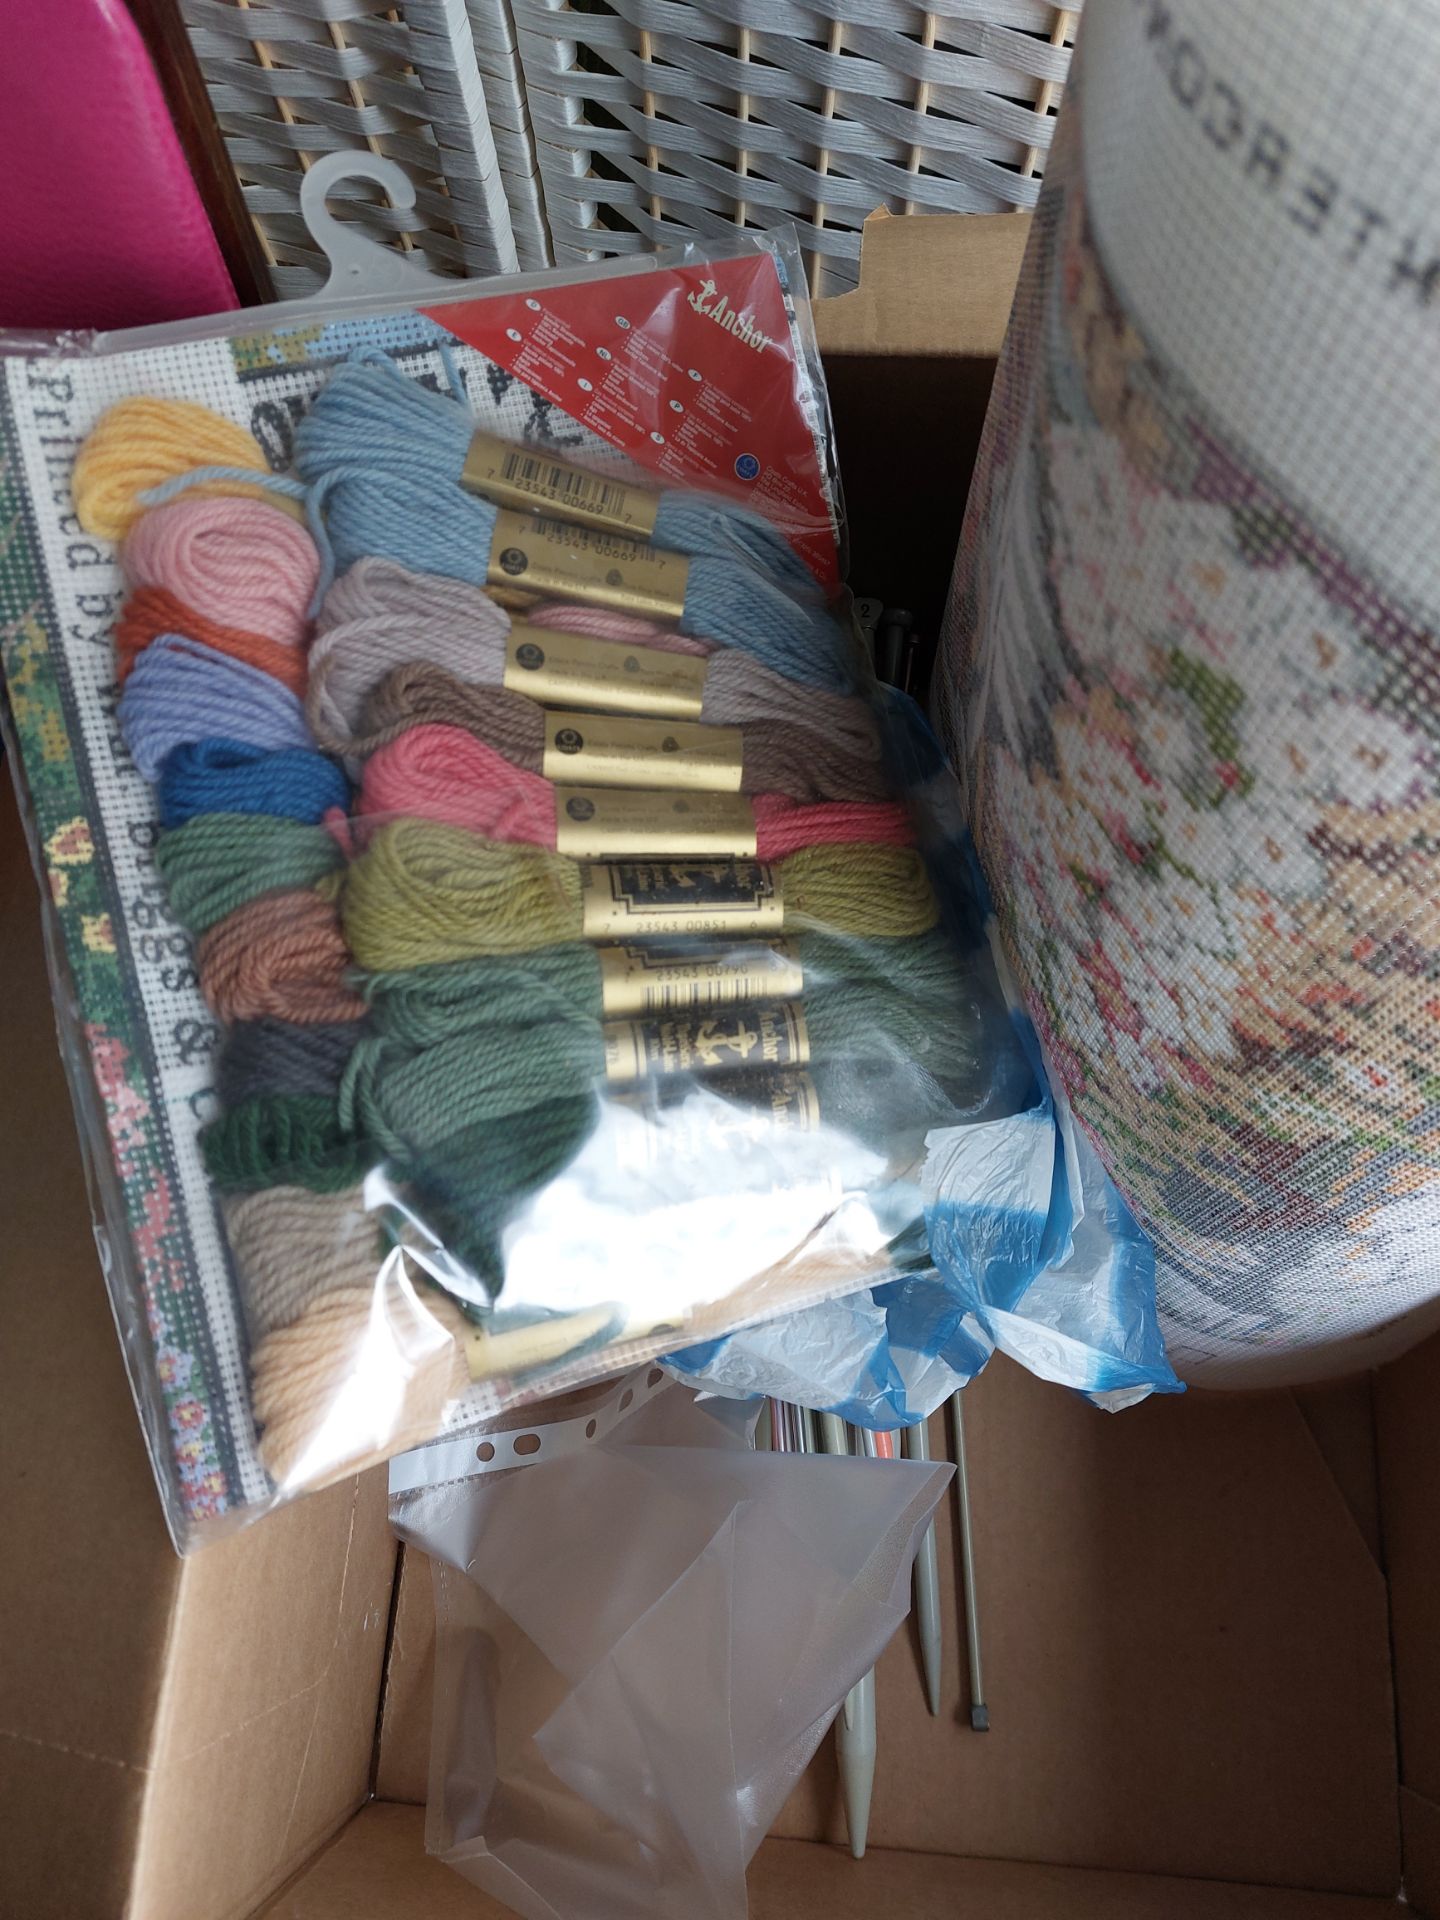 Tapestry Kits Canvas Needles and Wool - Image 6 of 14